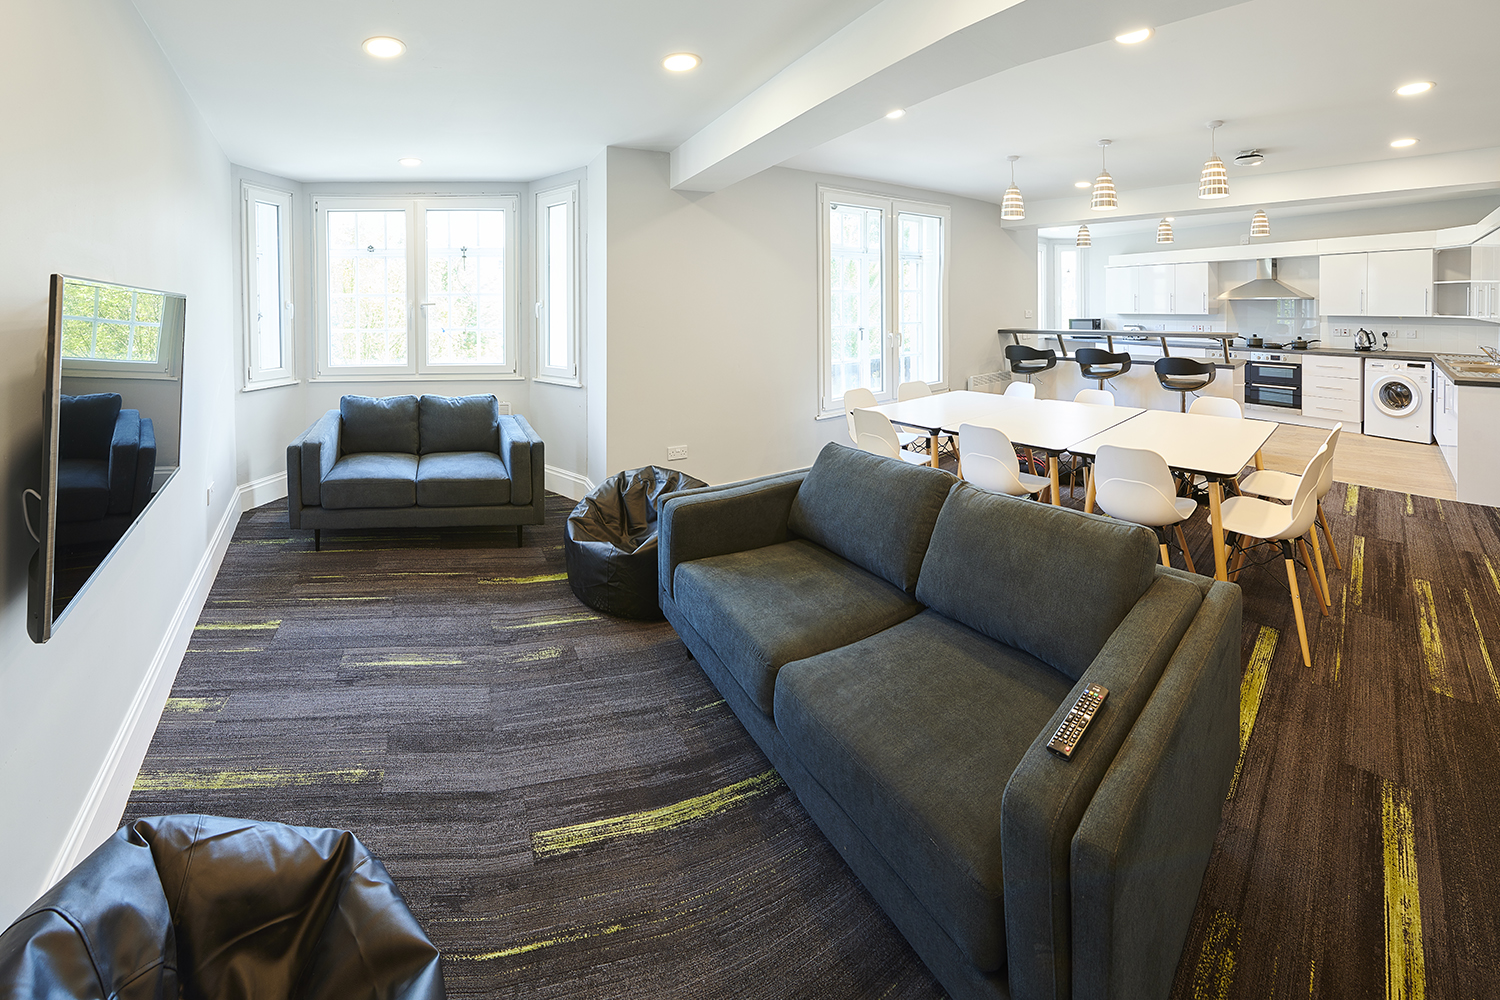 Lounge area in a set of flats in the eastern wing of Main Halls, with sofas and bean bags arranged around a flatscreen TV on the wall, with a dining area, breakfast bar and kitchen visible in the background.